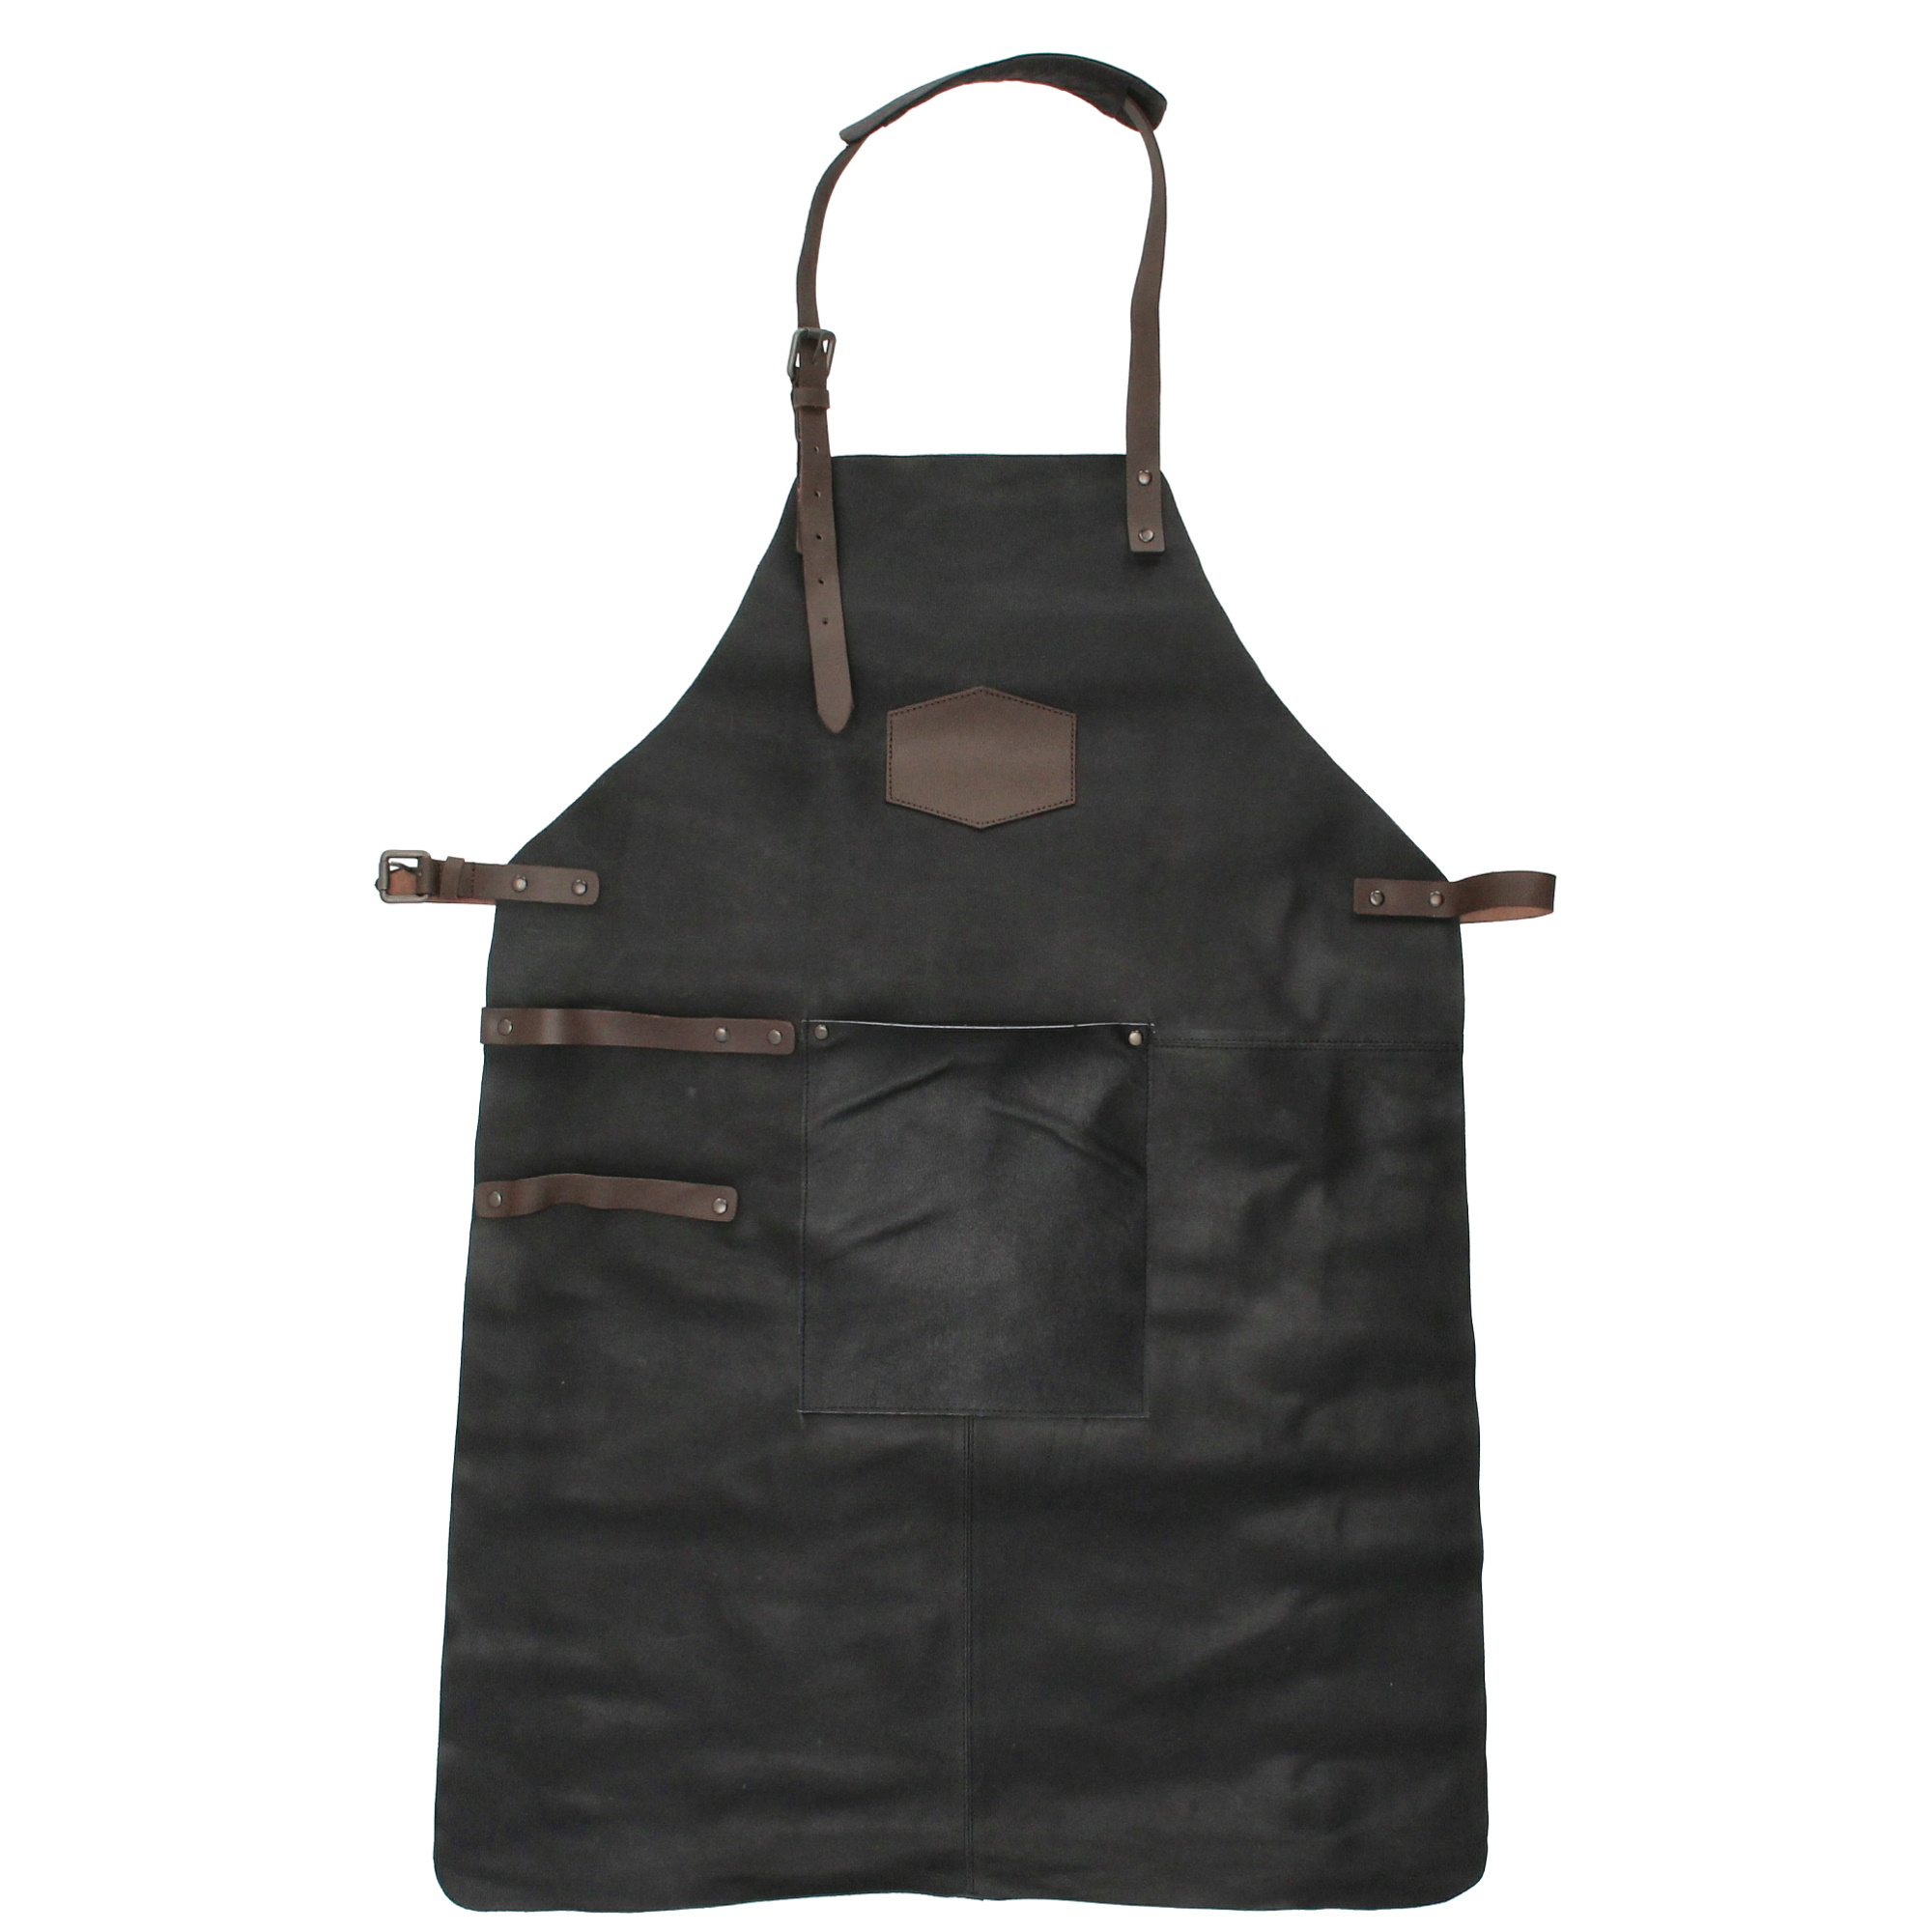 Old West Leather Apron for BBQ Lovers - Black (no logo)